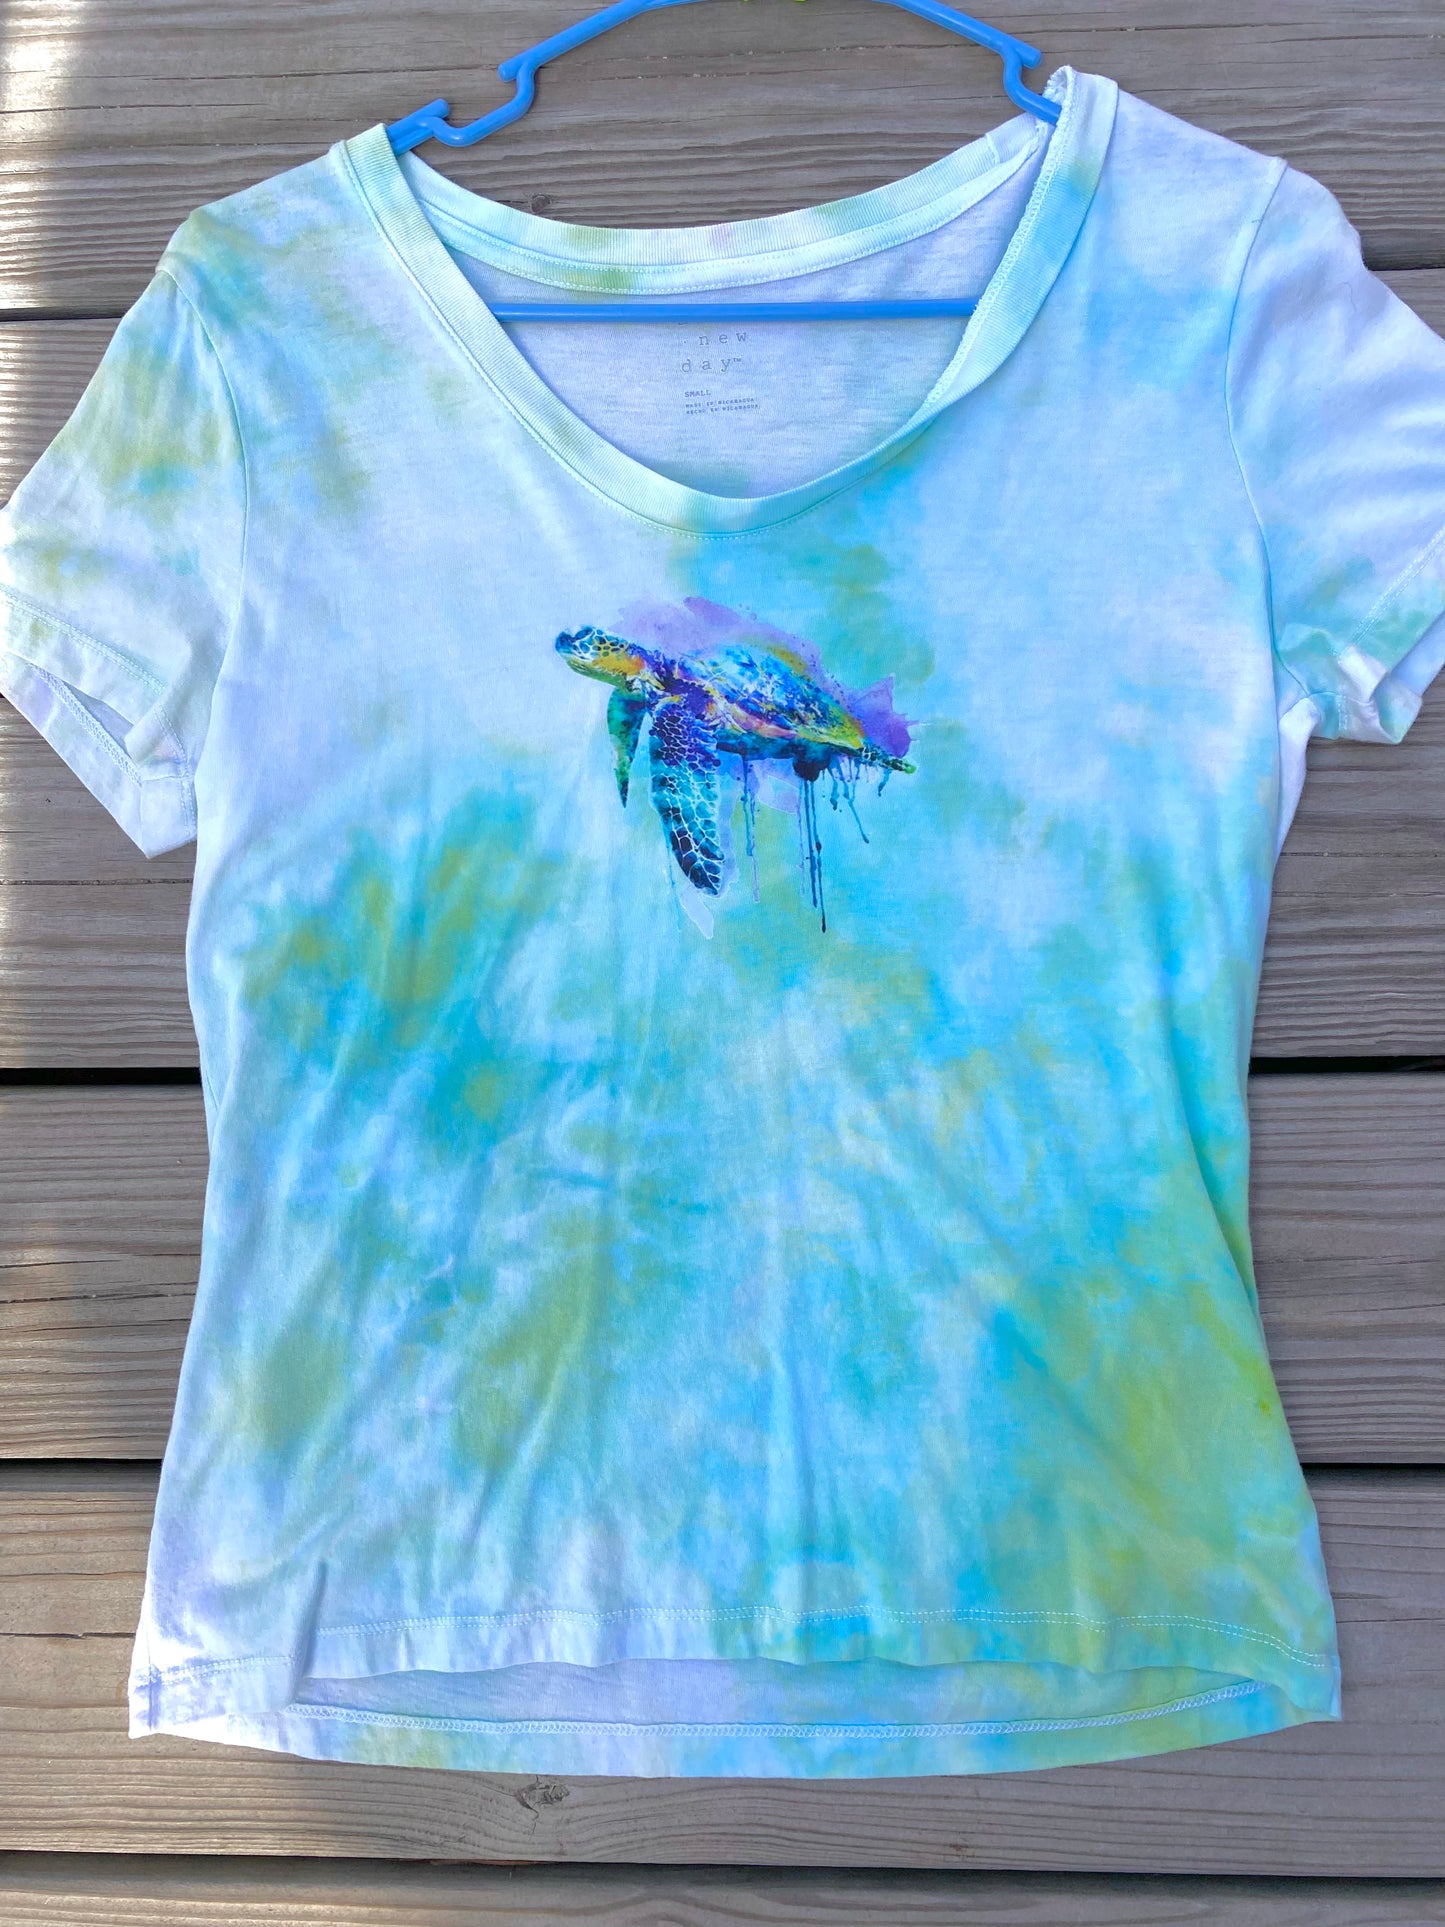 A new day small blue green teals sea turtle print women's shirt